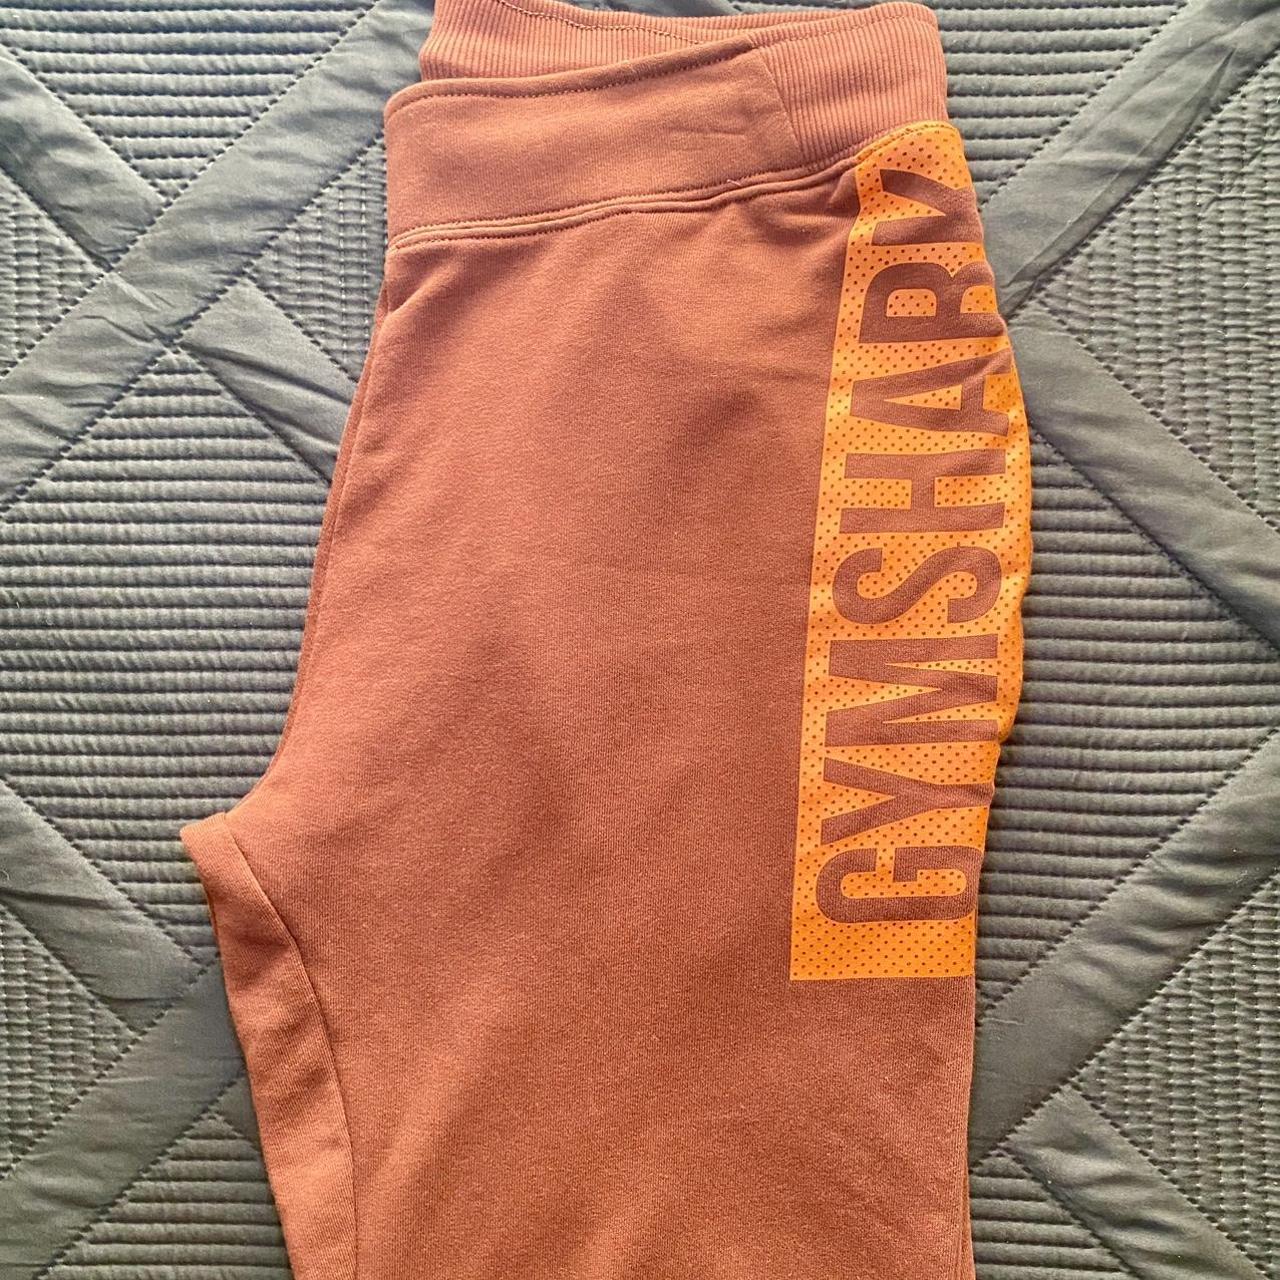 GymShark Joggers - US S - Cuffed at the ankles - - Depop